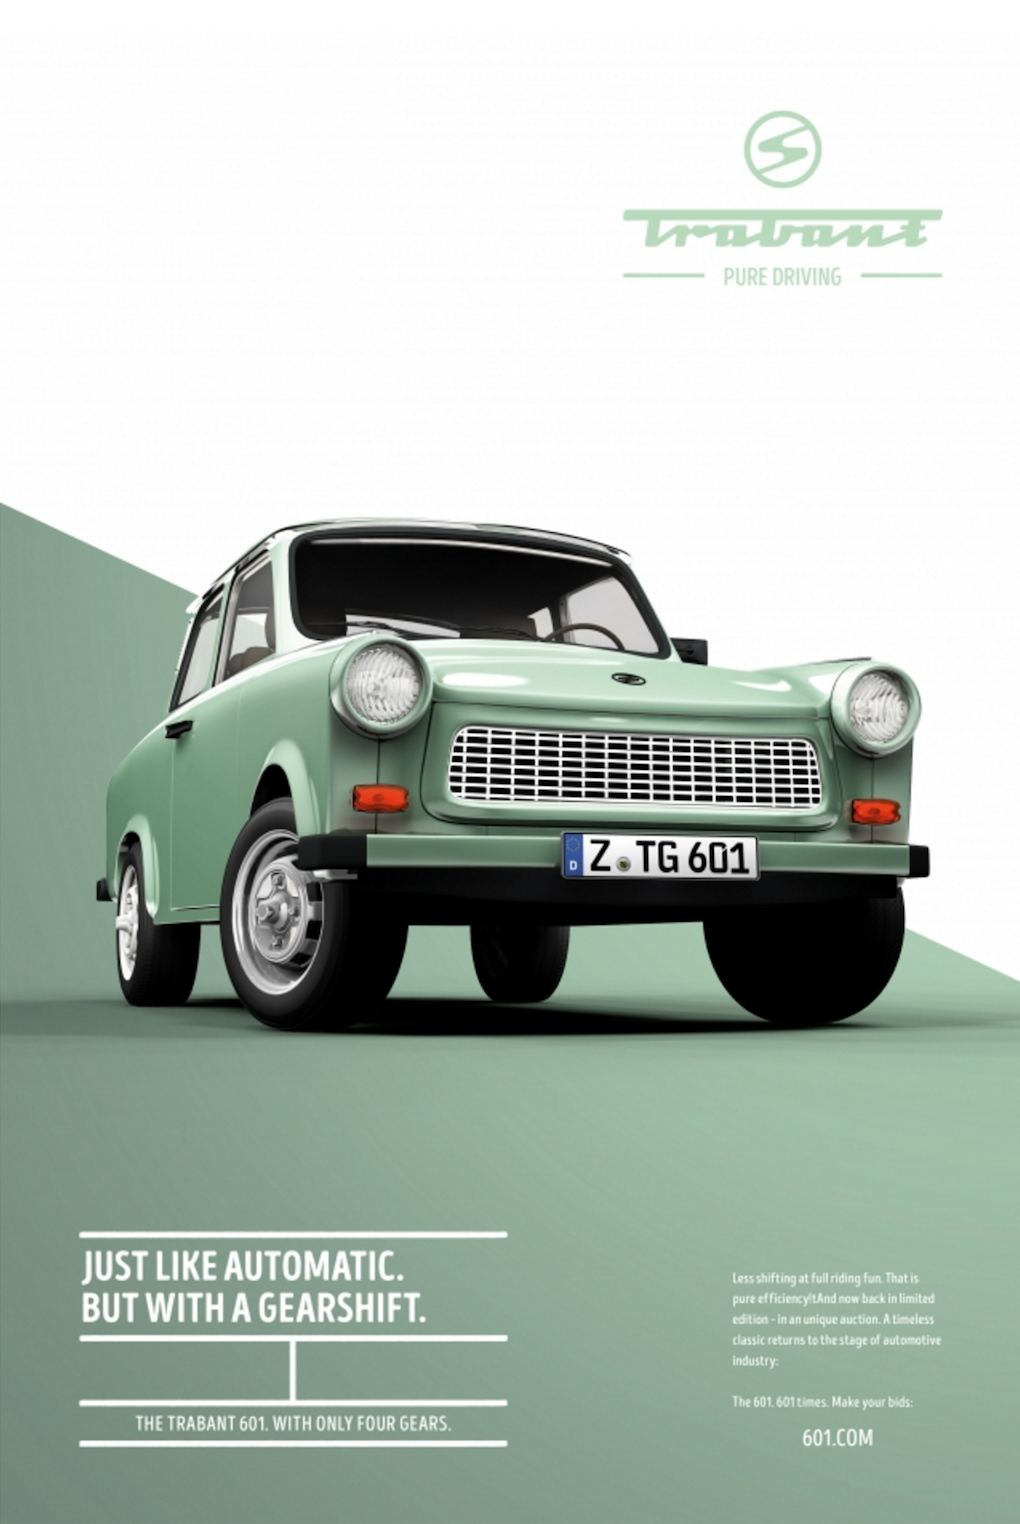 Trabant 601 - Pure driving Posters | design by Institute of Design, Düsseldorf, Germany